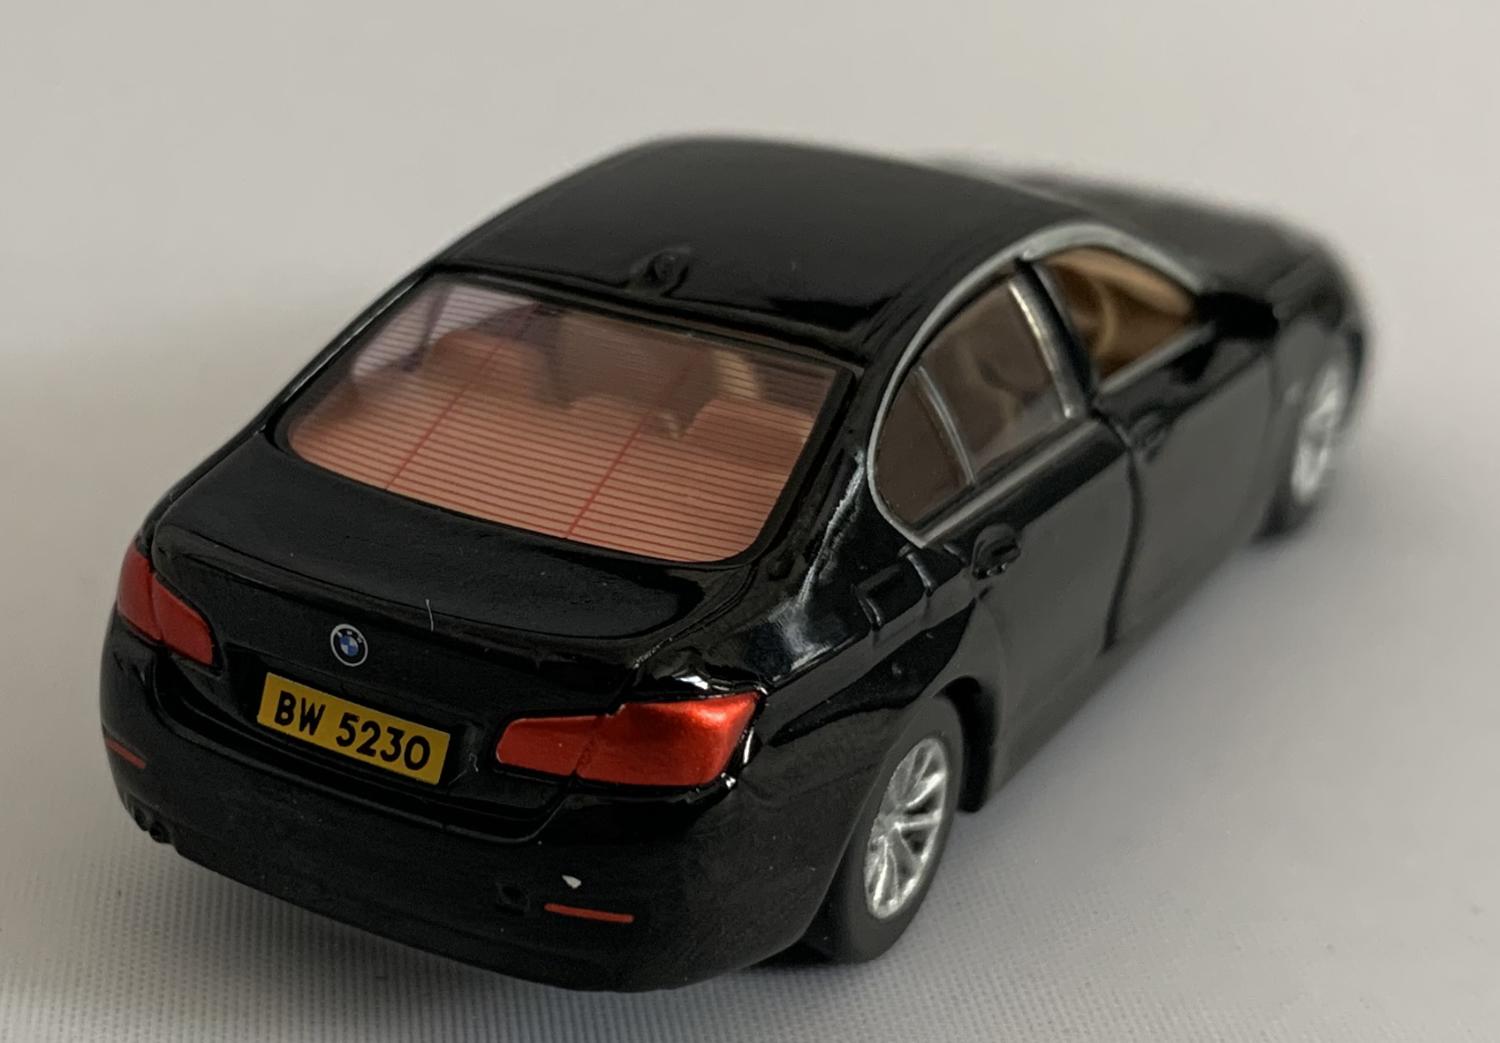 BMW 5 Series (F10) in black 1:64 scale model from Tiny